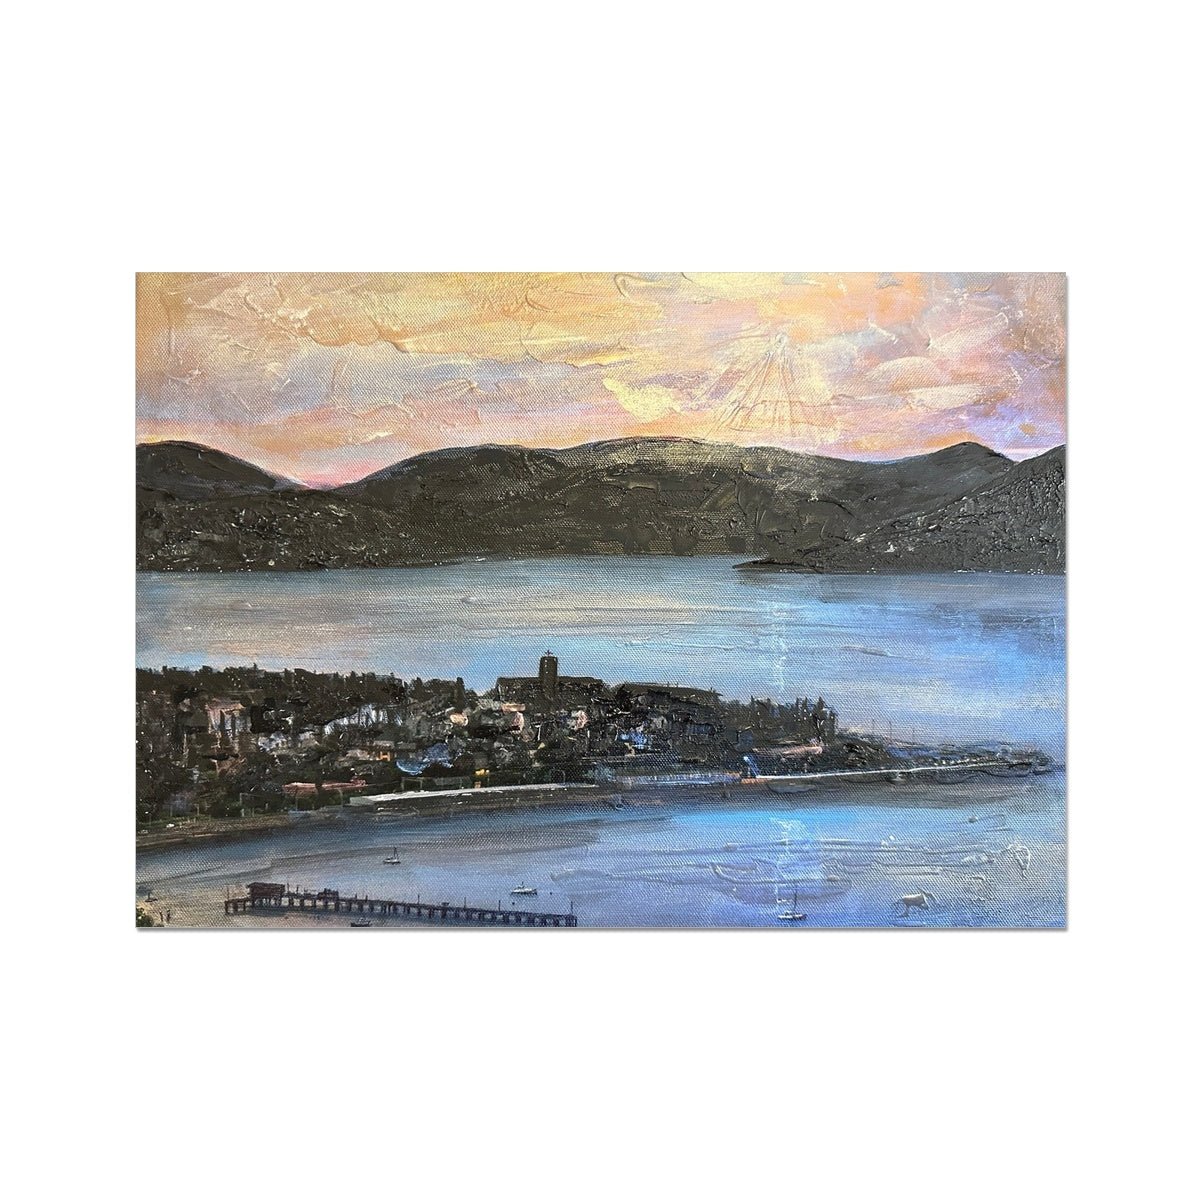 From Lyle Hill Painting | Fine Art Prints From Scotland-Unframed Prints-River Clyde Art Gallery-A2 Landscape-Paintings, Prints, Homeware, Art Gifts From Scotland By Scottish Artist Kevin Hunter